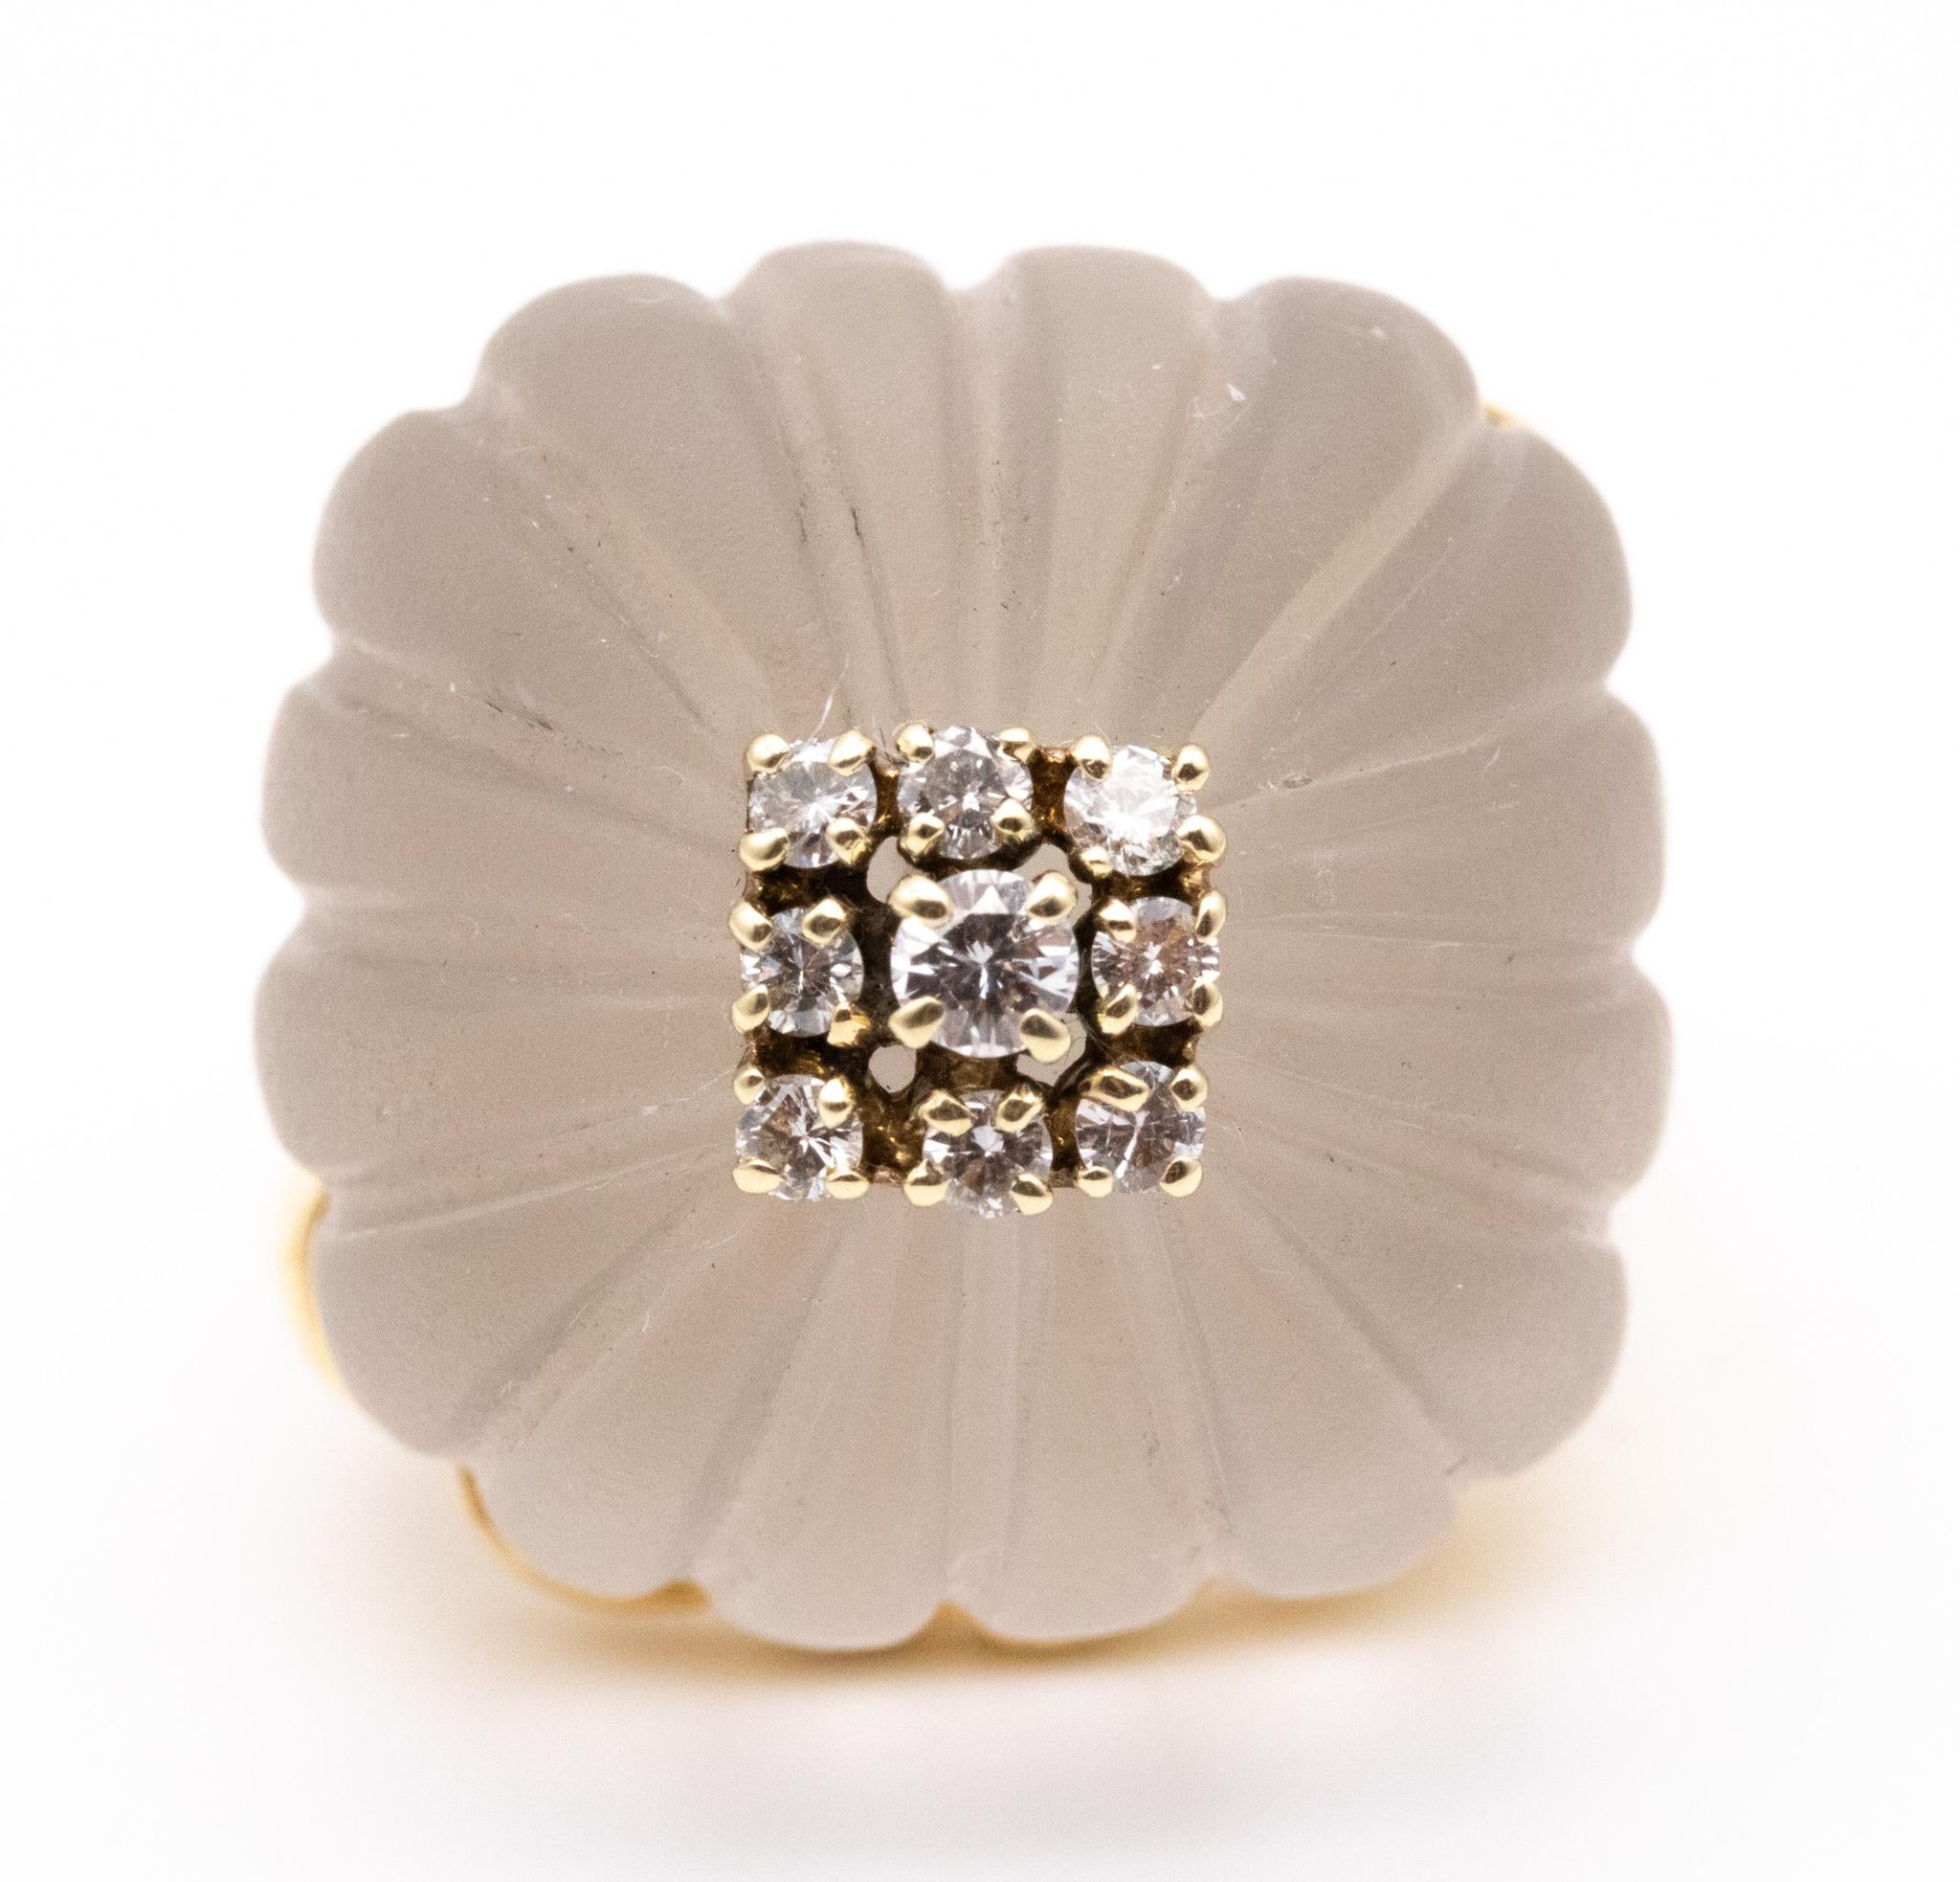 Modernist Cocktail Ring in 18kt Gold with Carved Rock Quartz and VS Diamonds 1